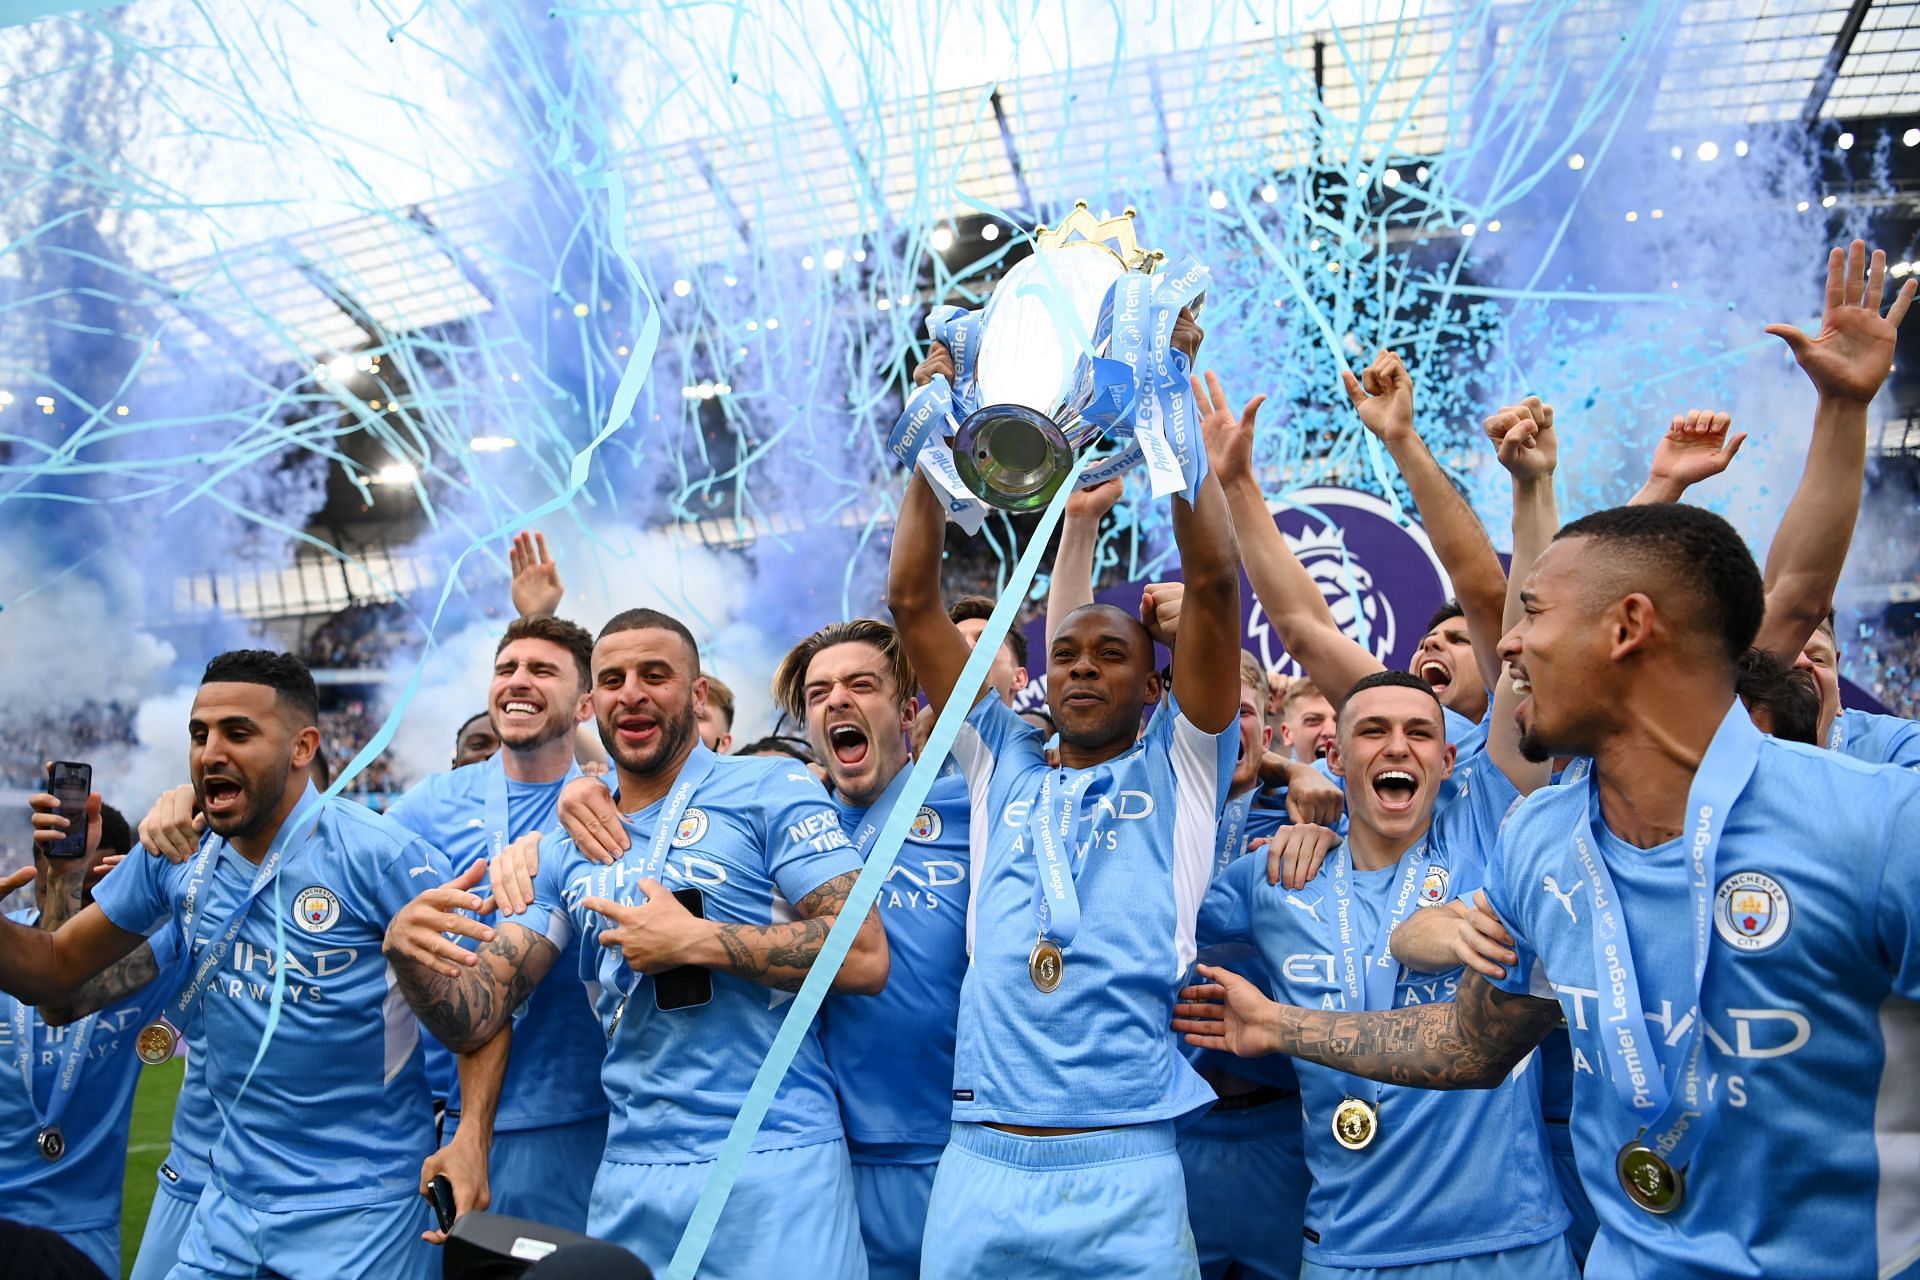 Manchester City successfully retained their league crown